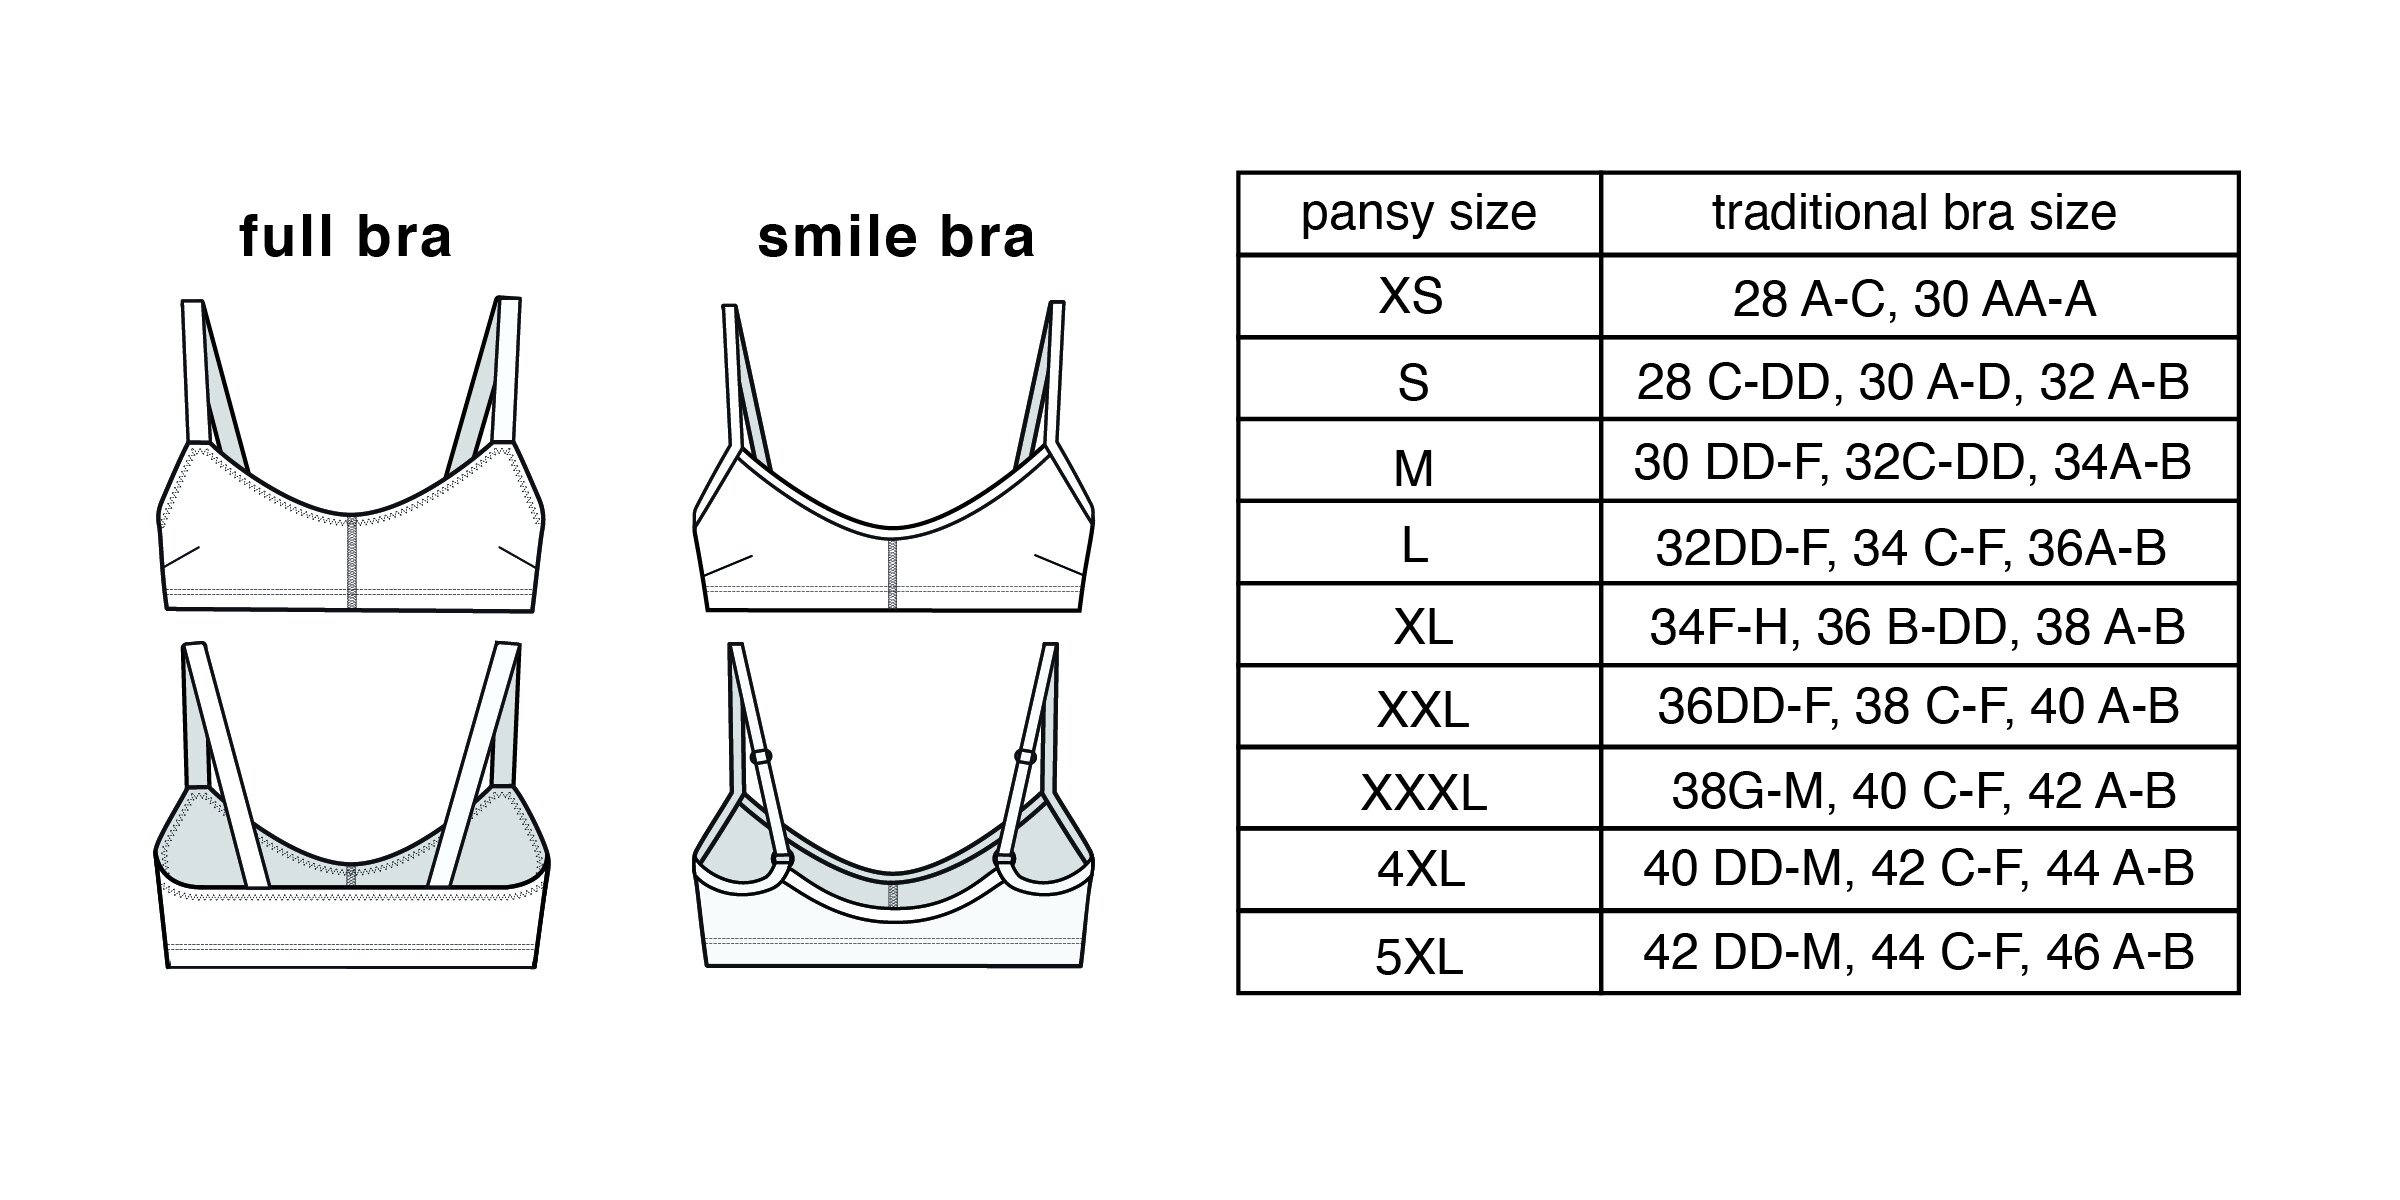 What Is A Large Bra Size